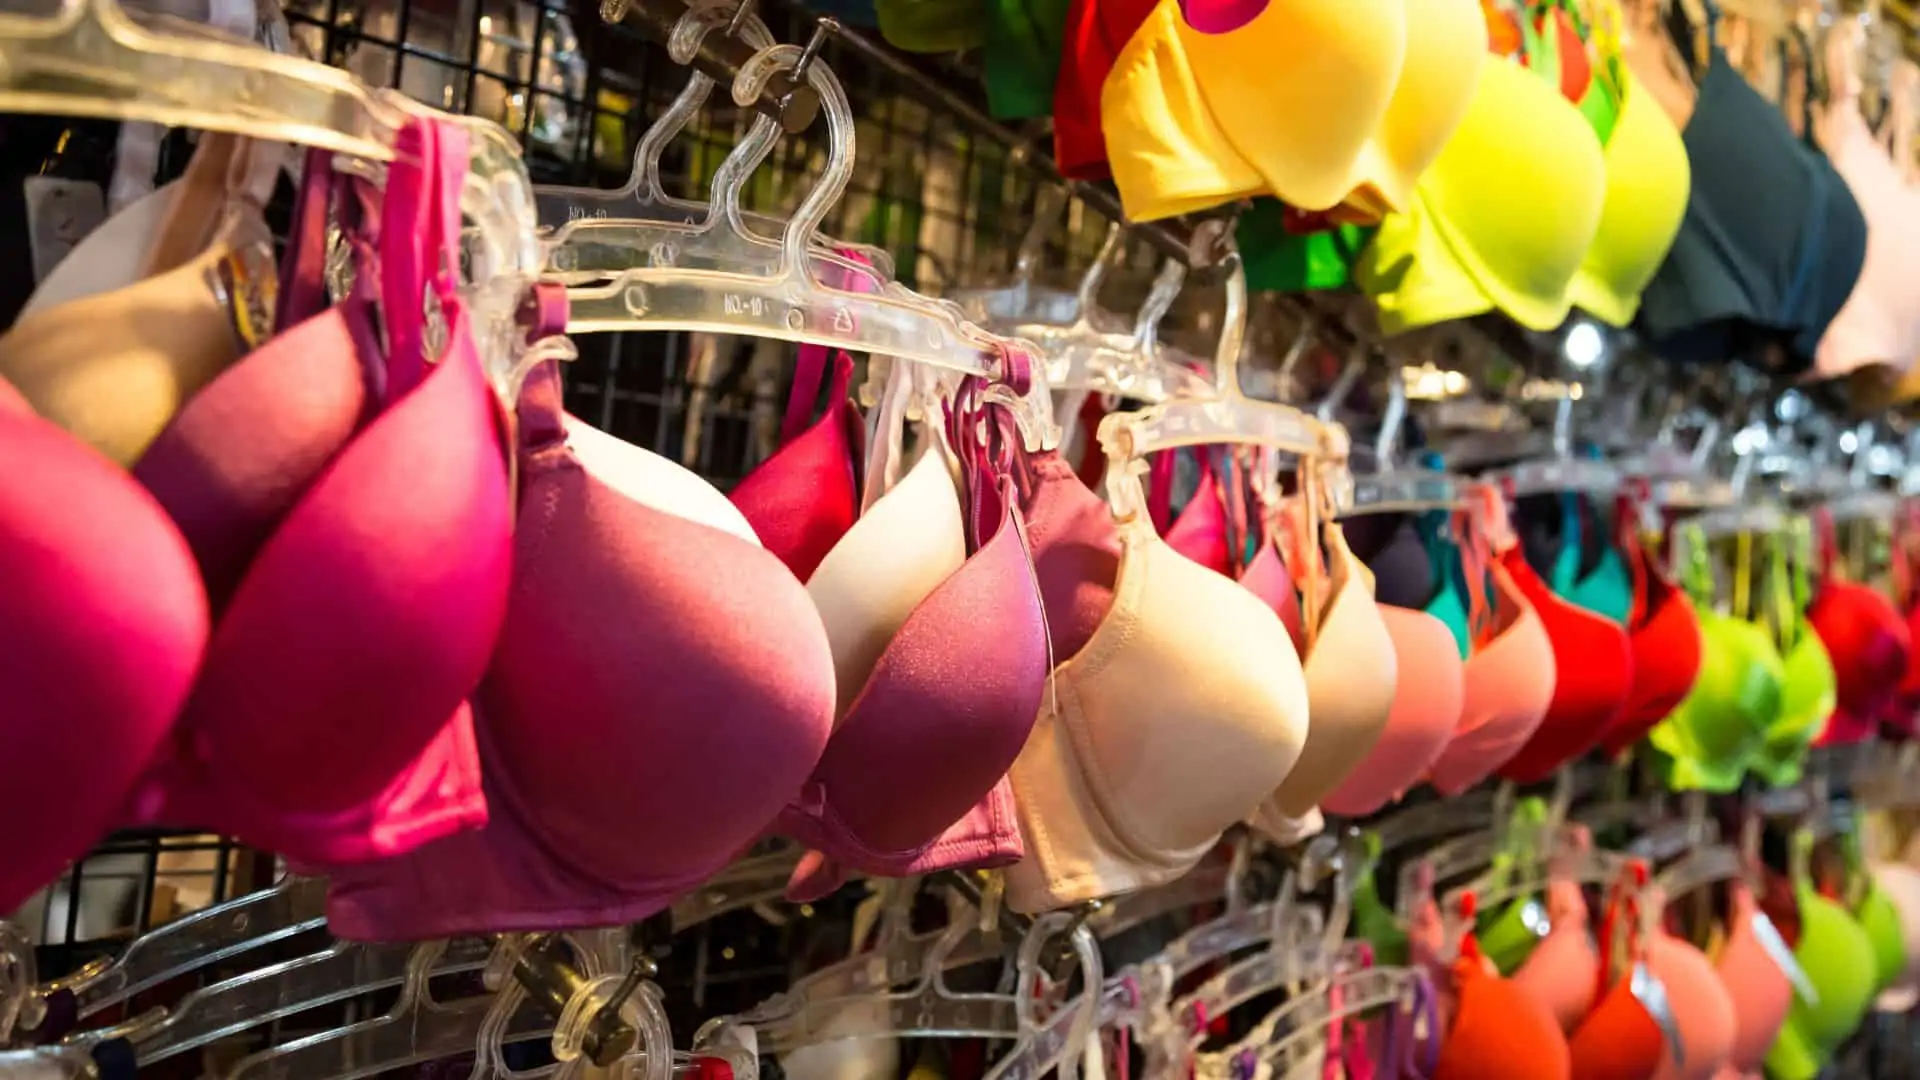 Can You Wear an Underwire Bra Through Airport Security?